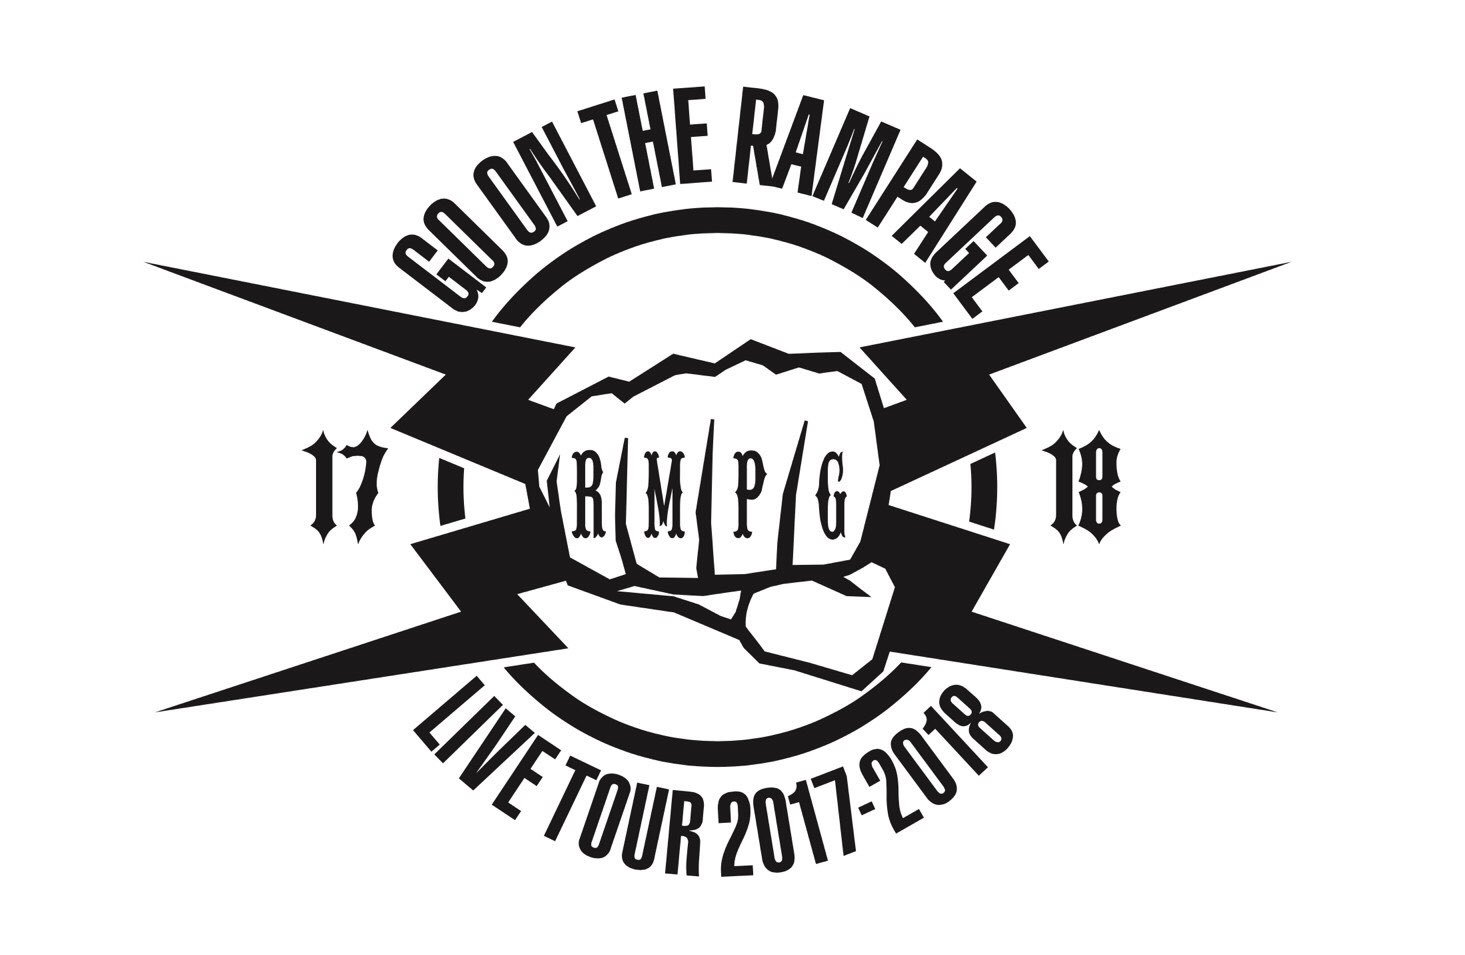 The Rampage Official The Rampage Live Tour 17 18 Go On The Rampage Tour Logo 解禁 Get Ready To Rampage Therampage Goontherampage Getreadytorampage T Co Yeupfmkfdk Twitter